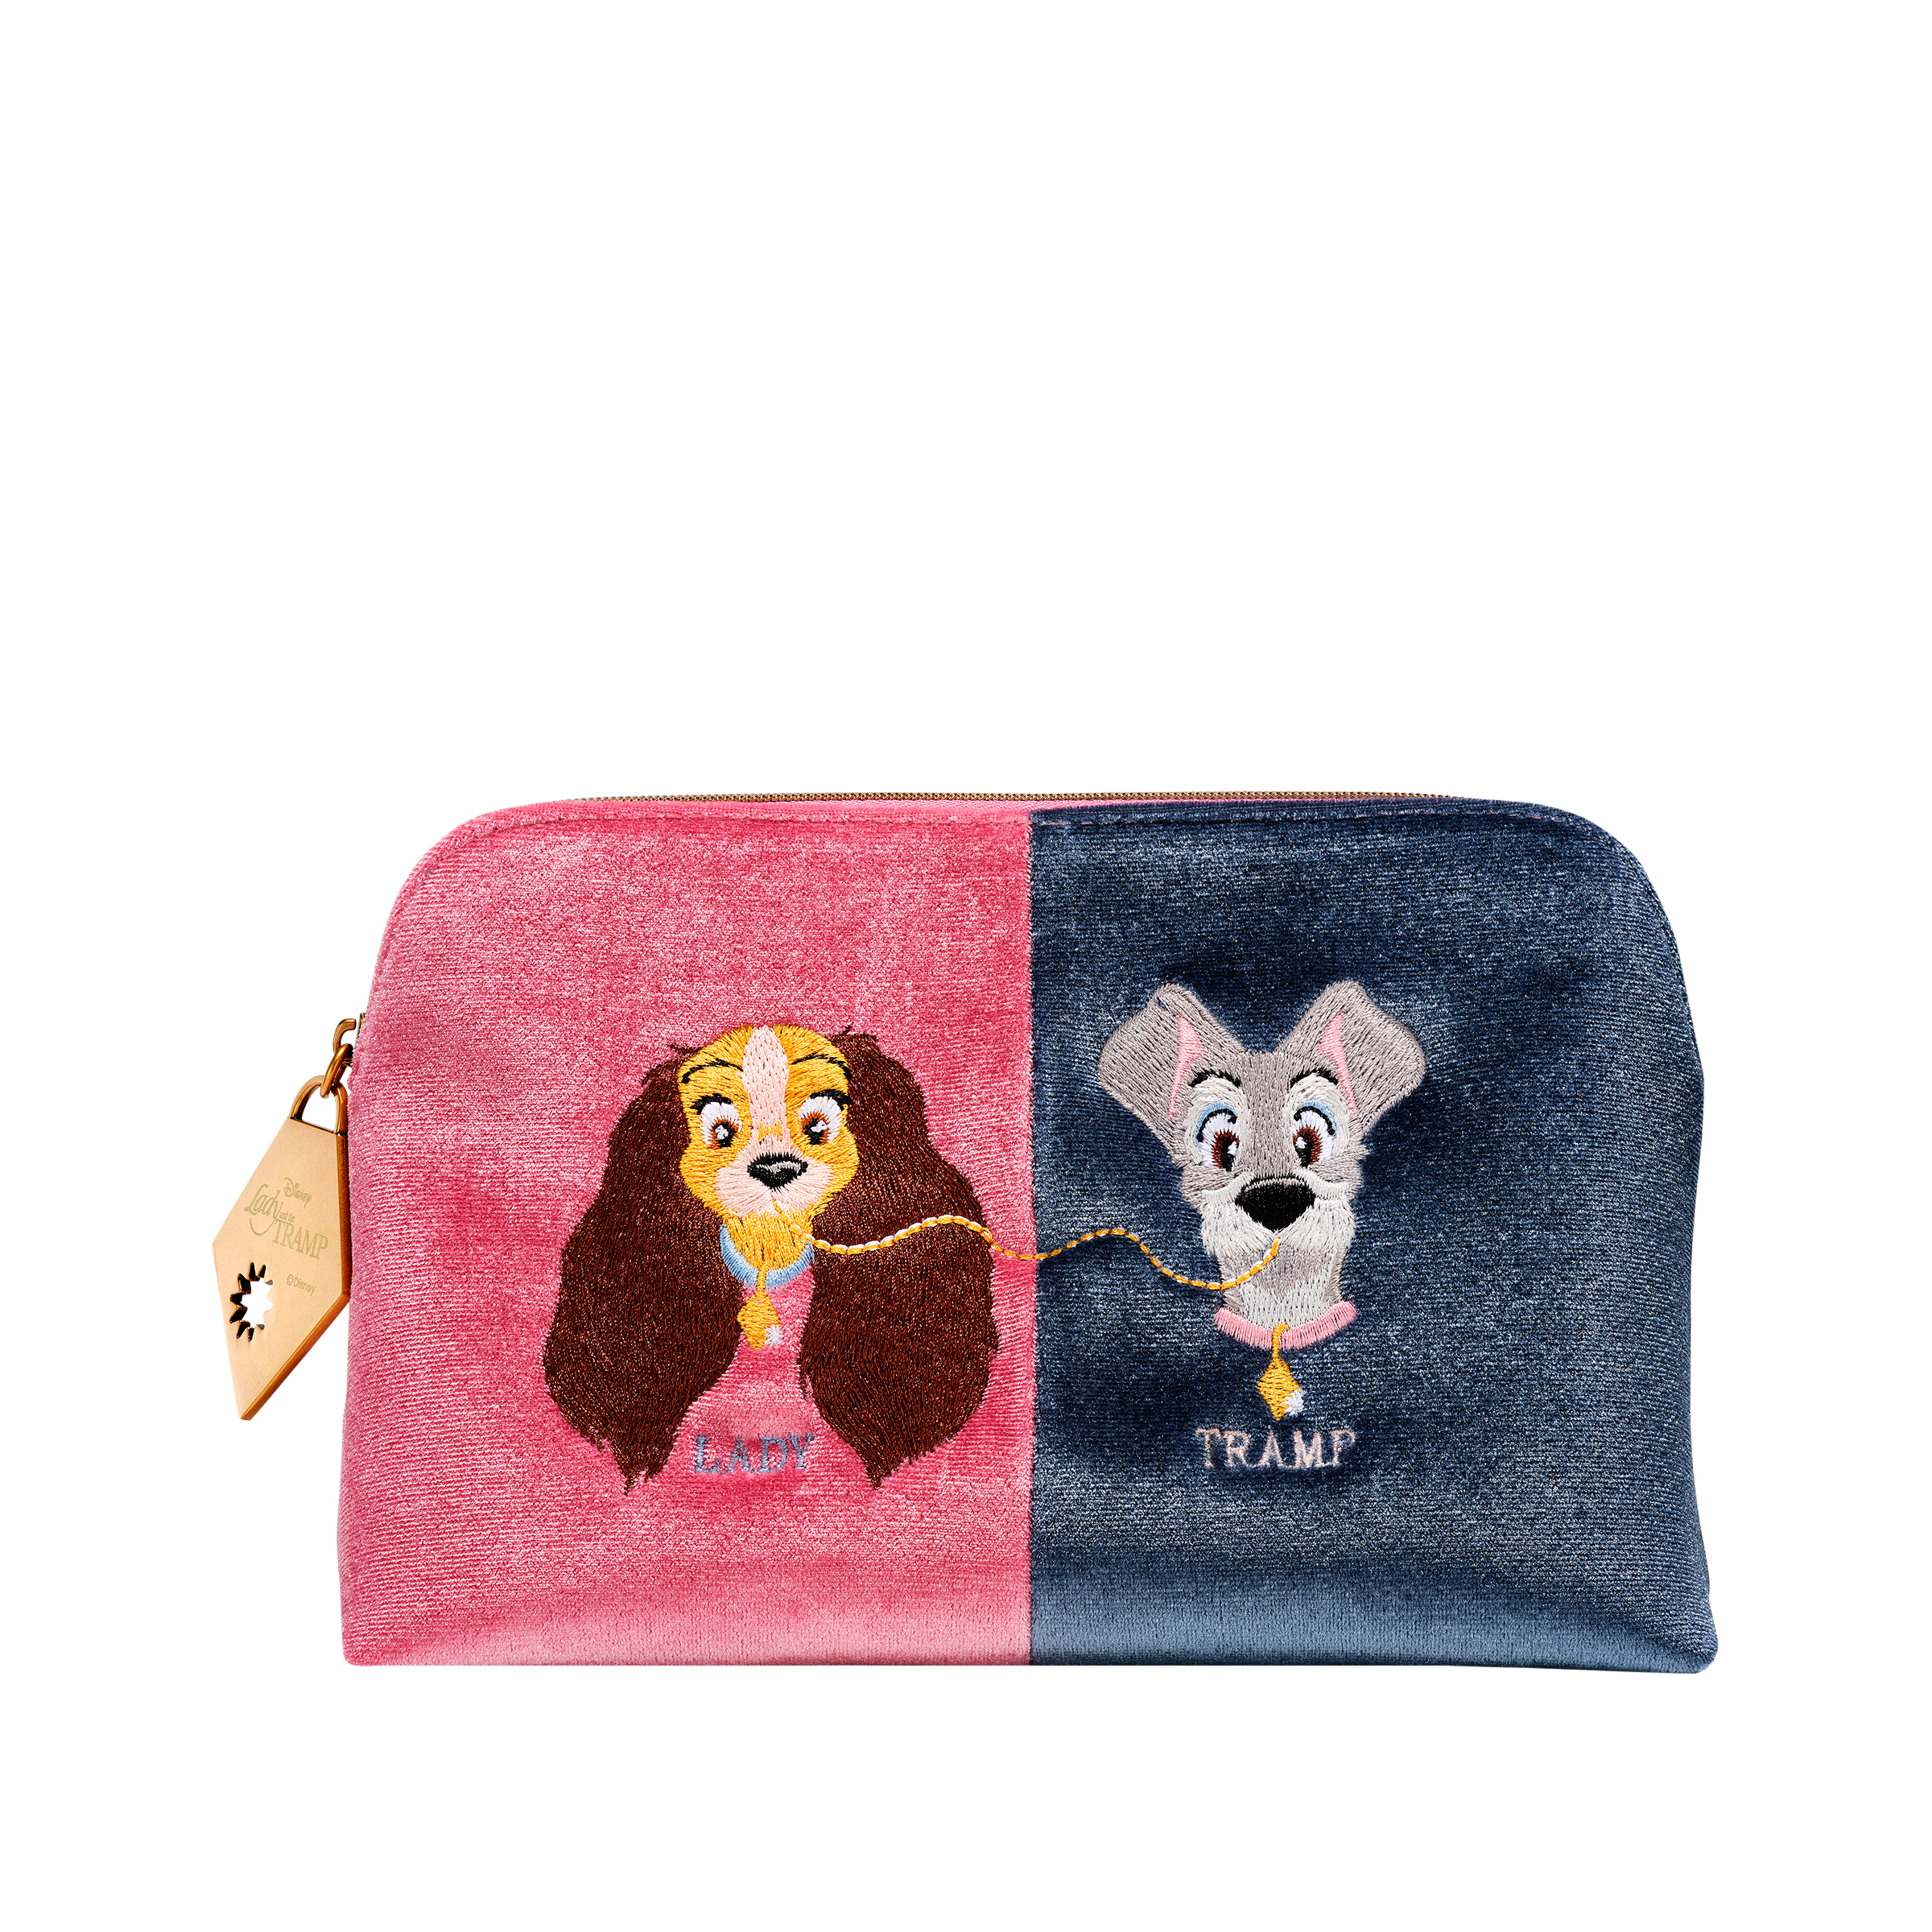 spectrum collections lady & the tramp makeup bag